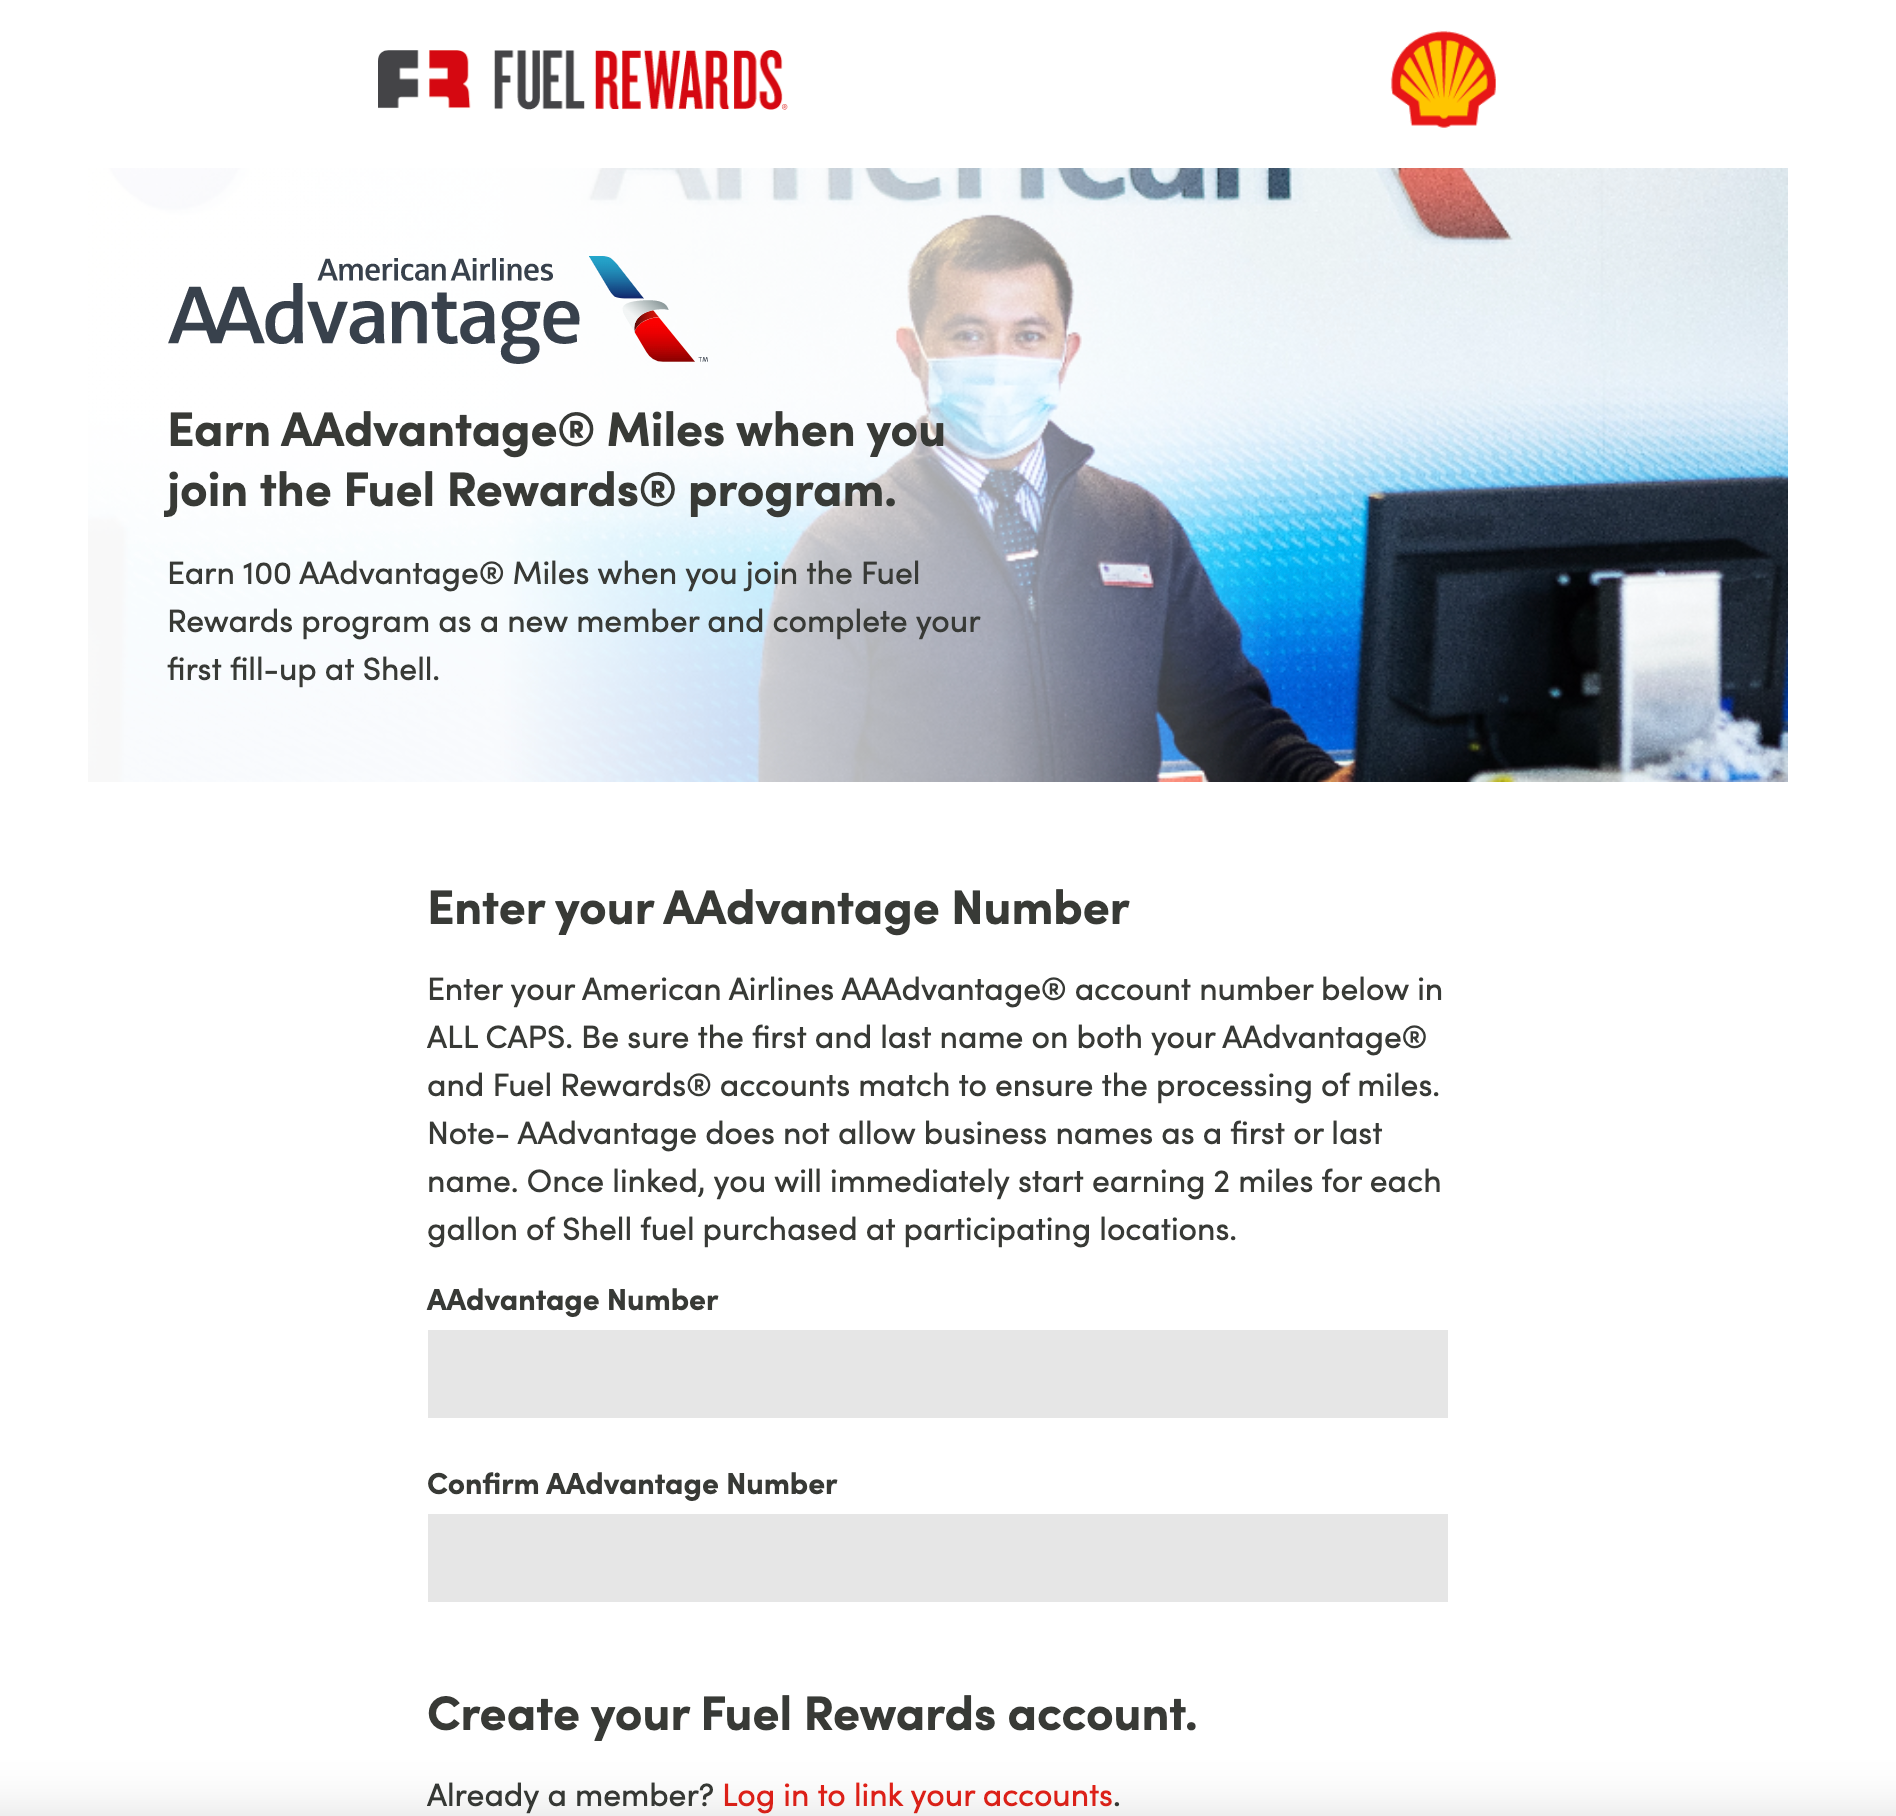 Signup process for Fuel Rewards (Screenshot courtesy American Airlines and Fuel Rewards)